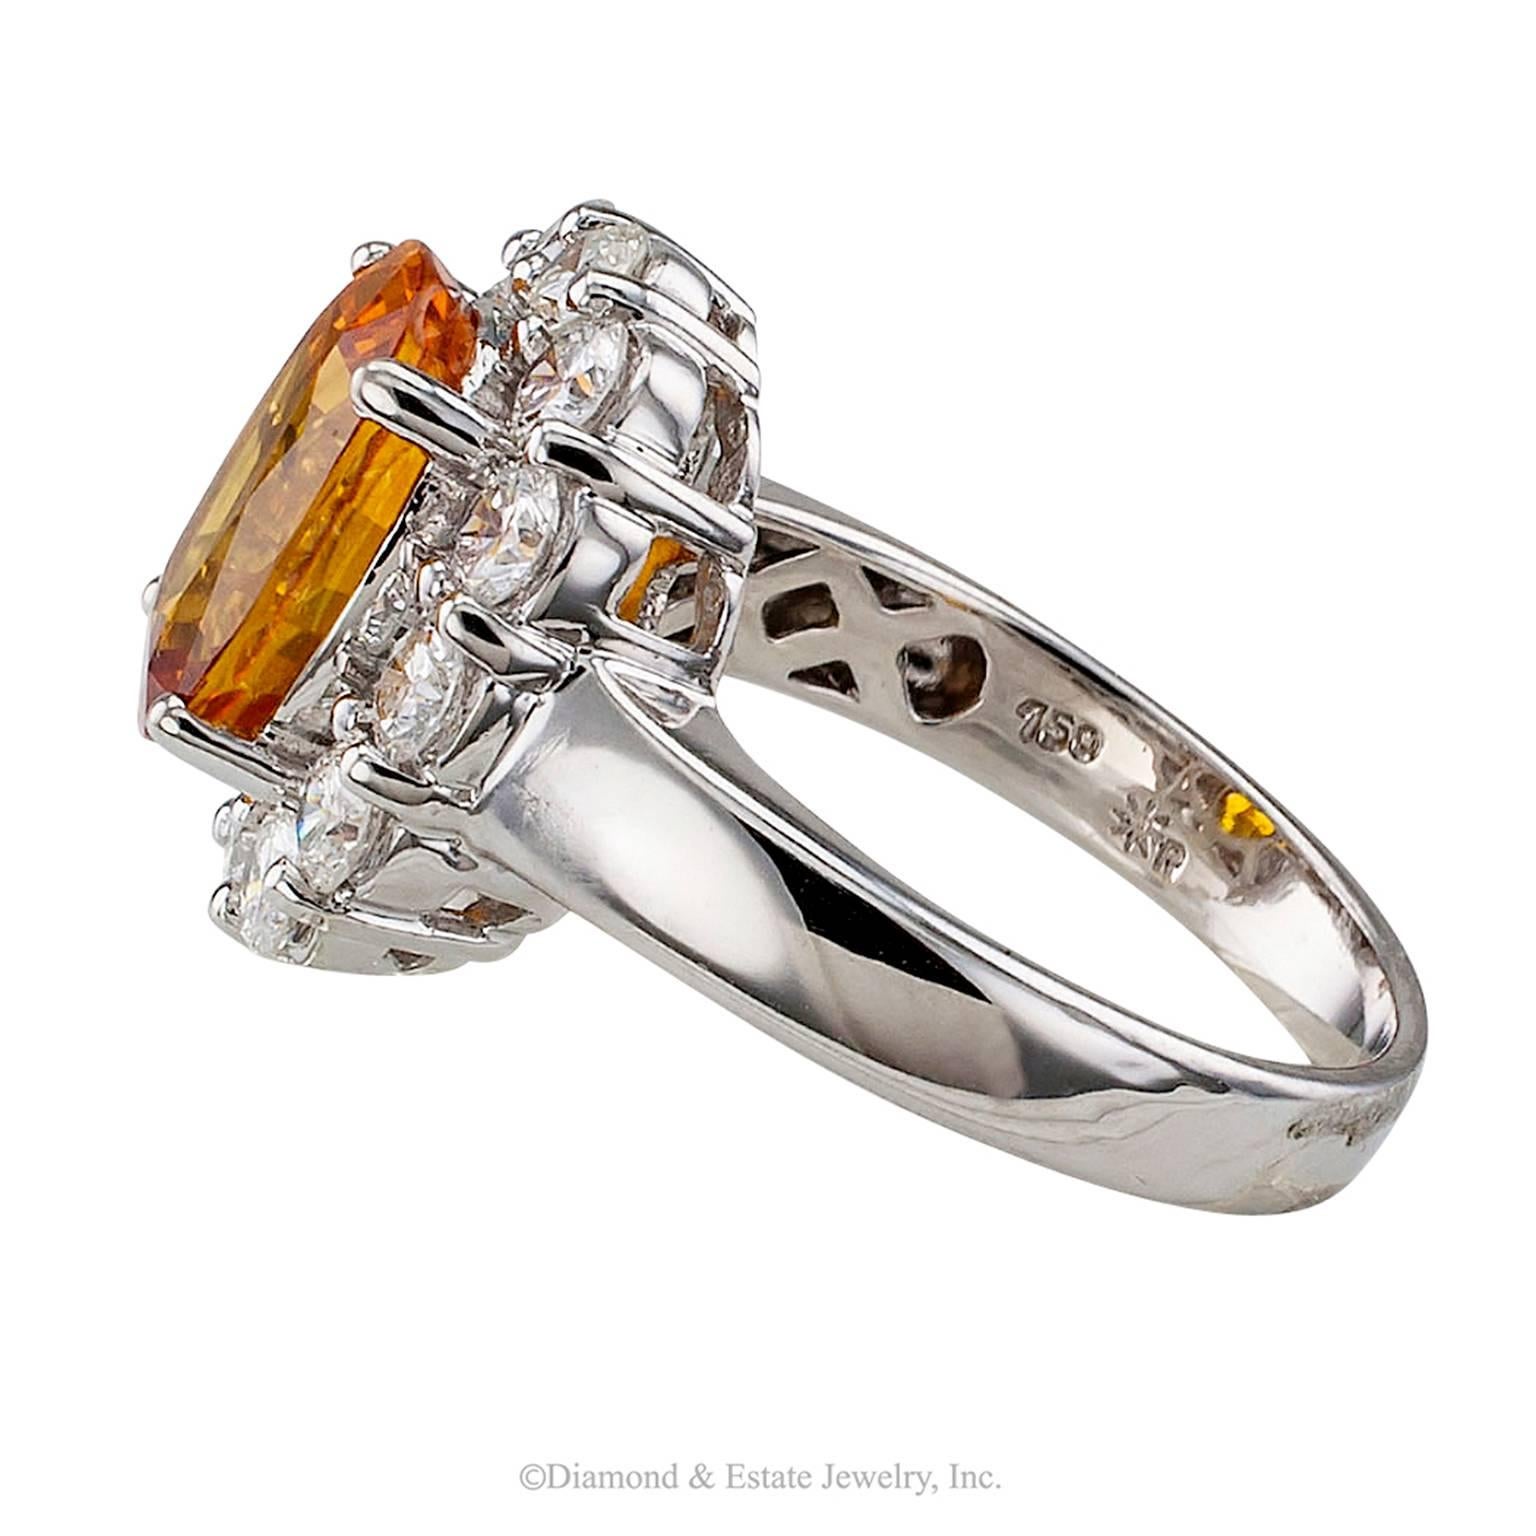 Orange Sapphire Diamond Gold Ring

Orange sapphire 4.75 carats set in an 18 karat white gold and diamond ring circa 1990.  Centering upon a bright orange colored oval sapphire weighing 4.75 carats, within a conforming border of round brilliant-cut